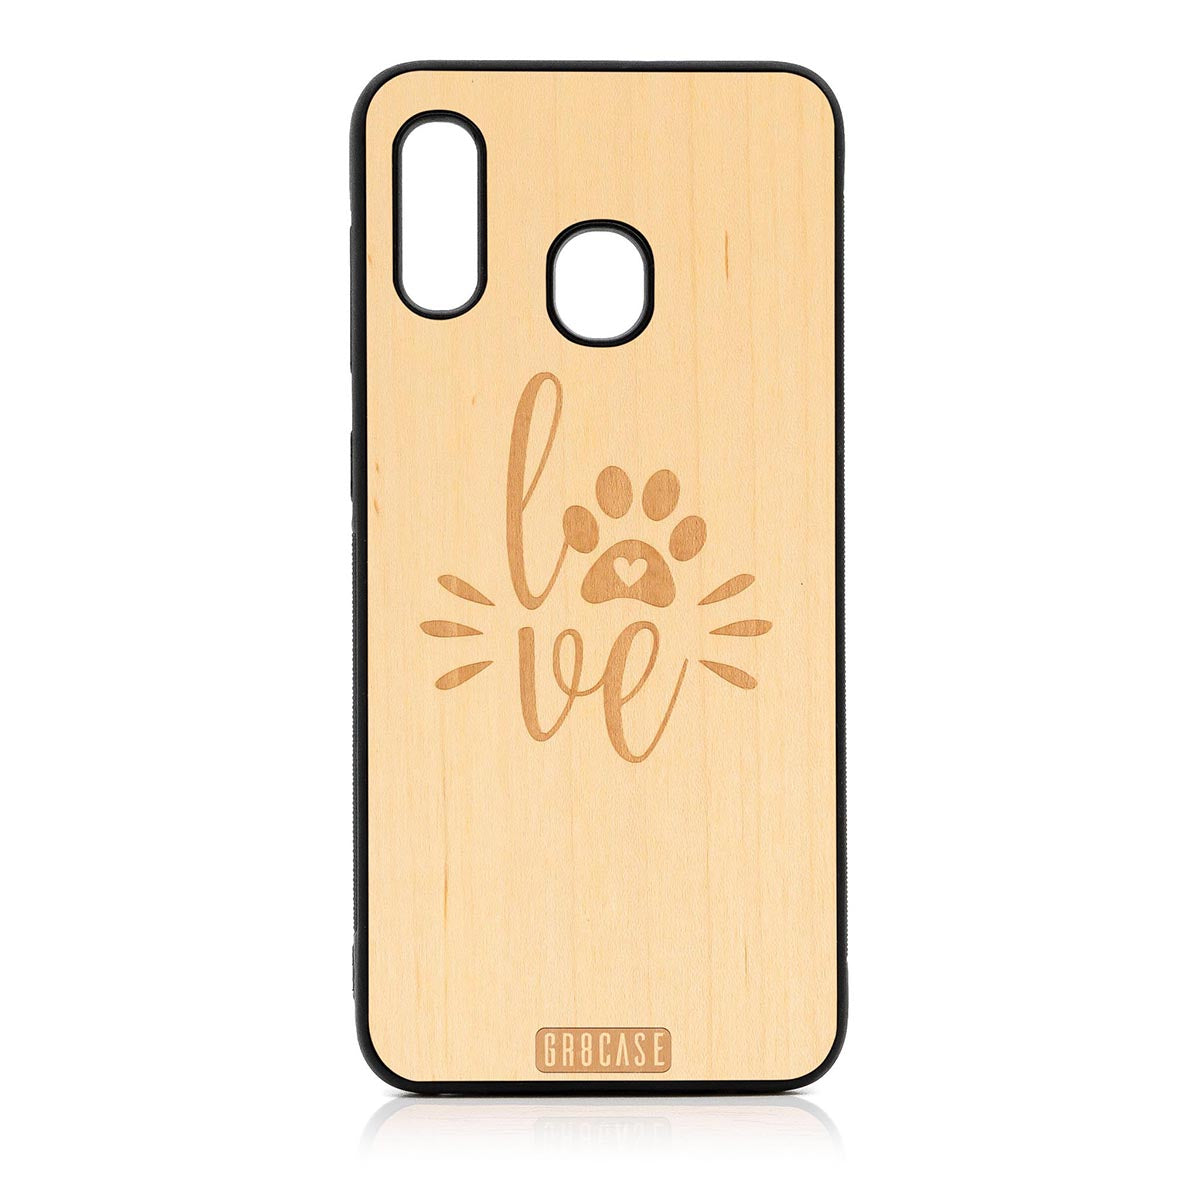 Paw Love Design Wood Case For Samsung Galaxy A20 by GR8CASE